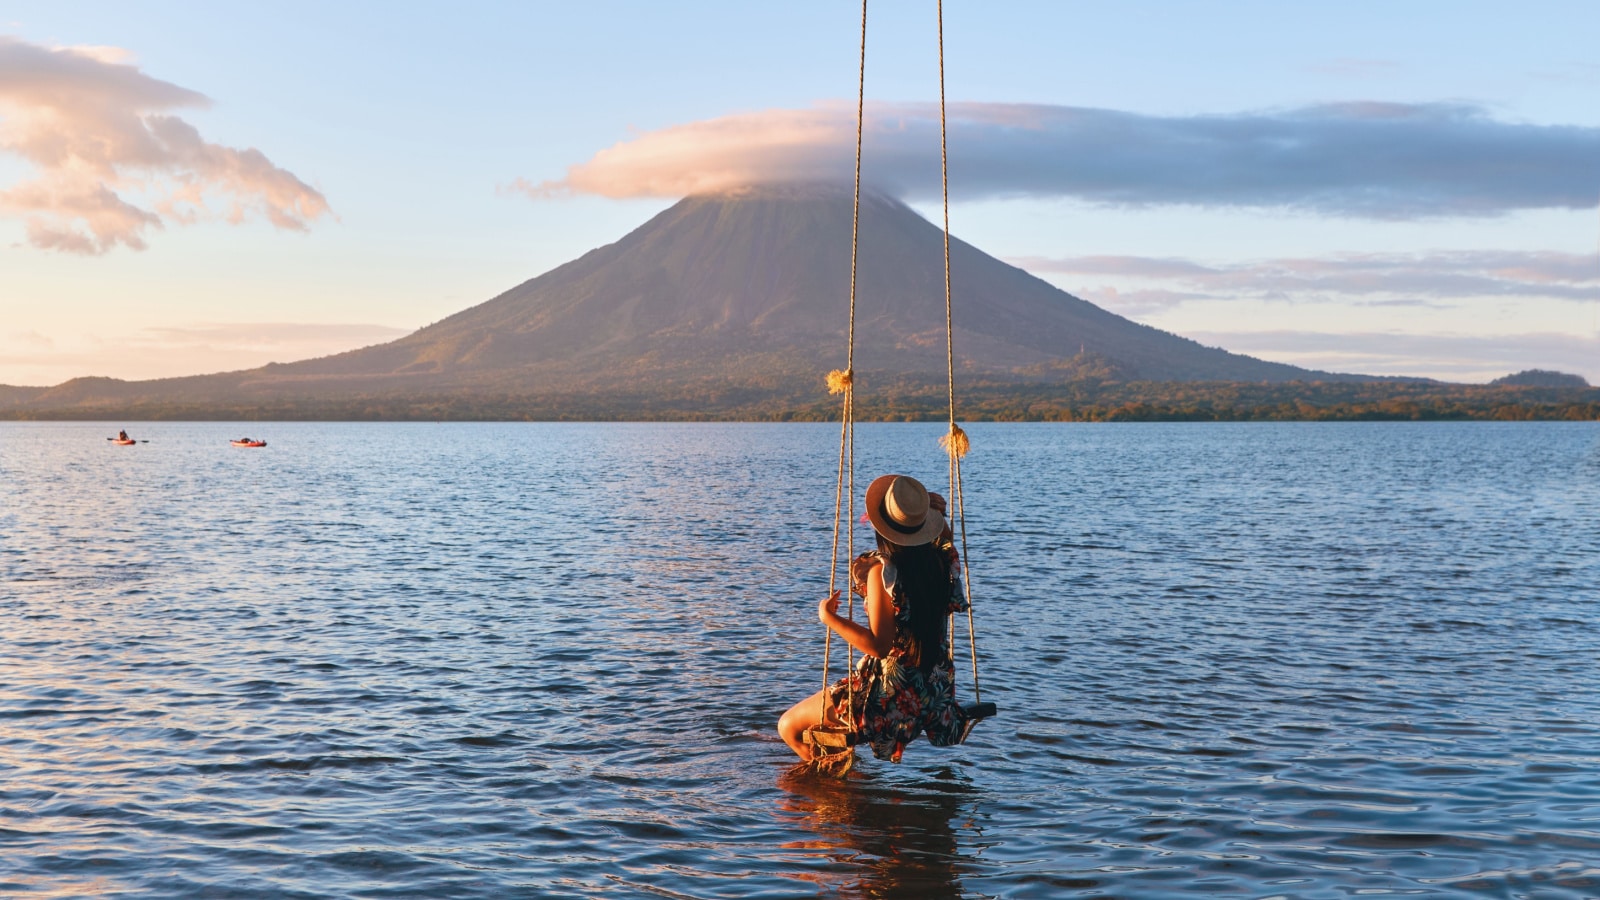 A Back view of woman sitting on a swing overlooking the volcano concenpcion on ometepe island, Nicaragua.